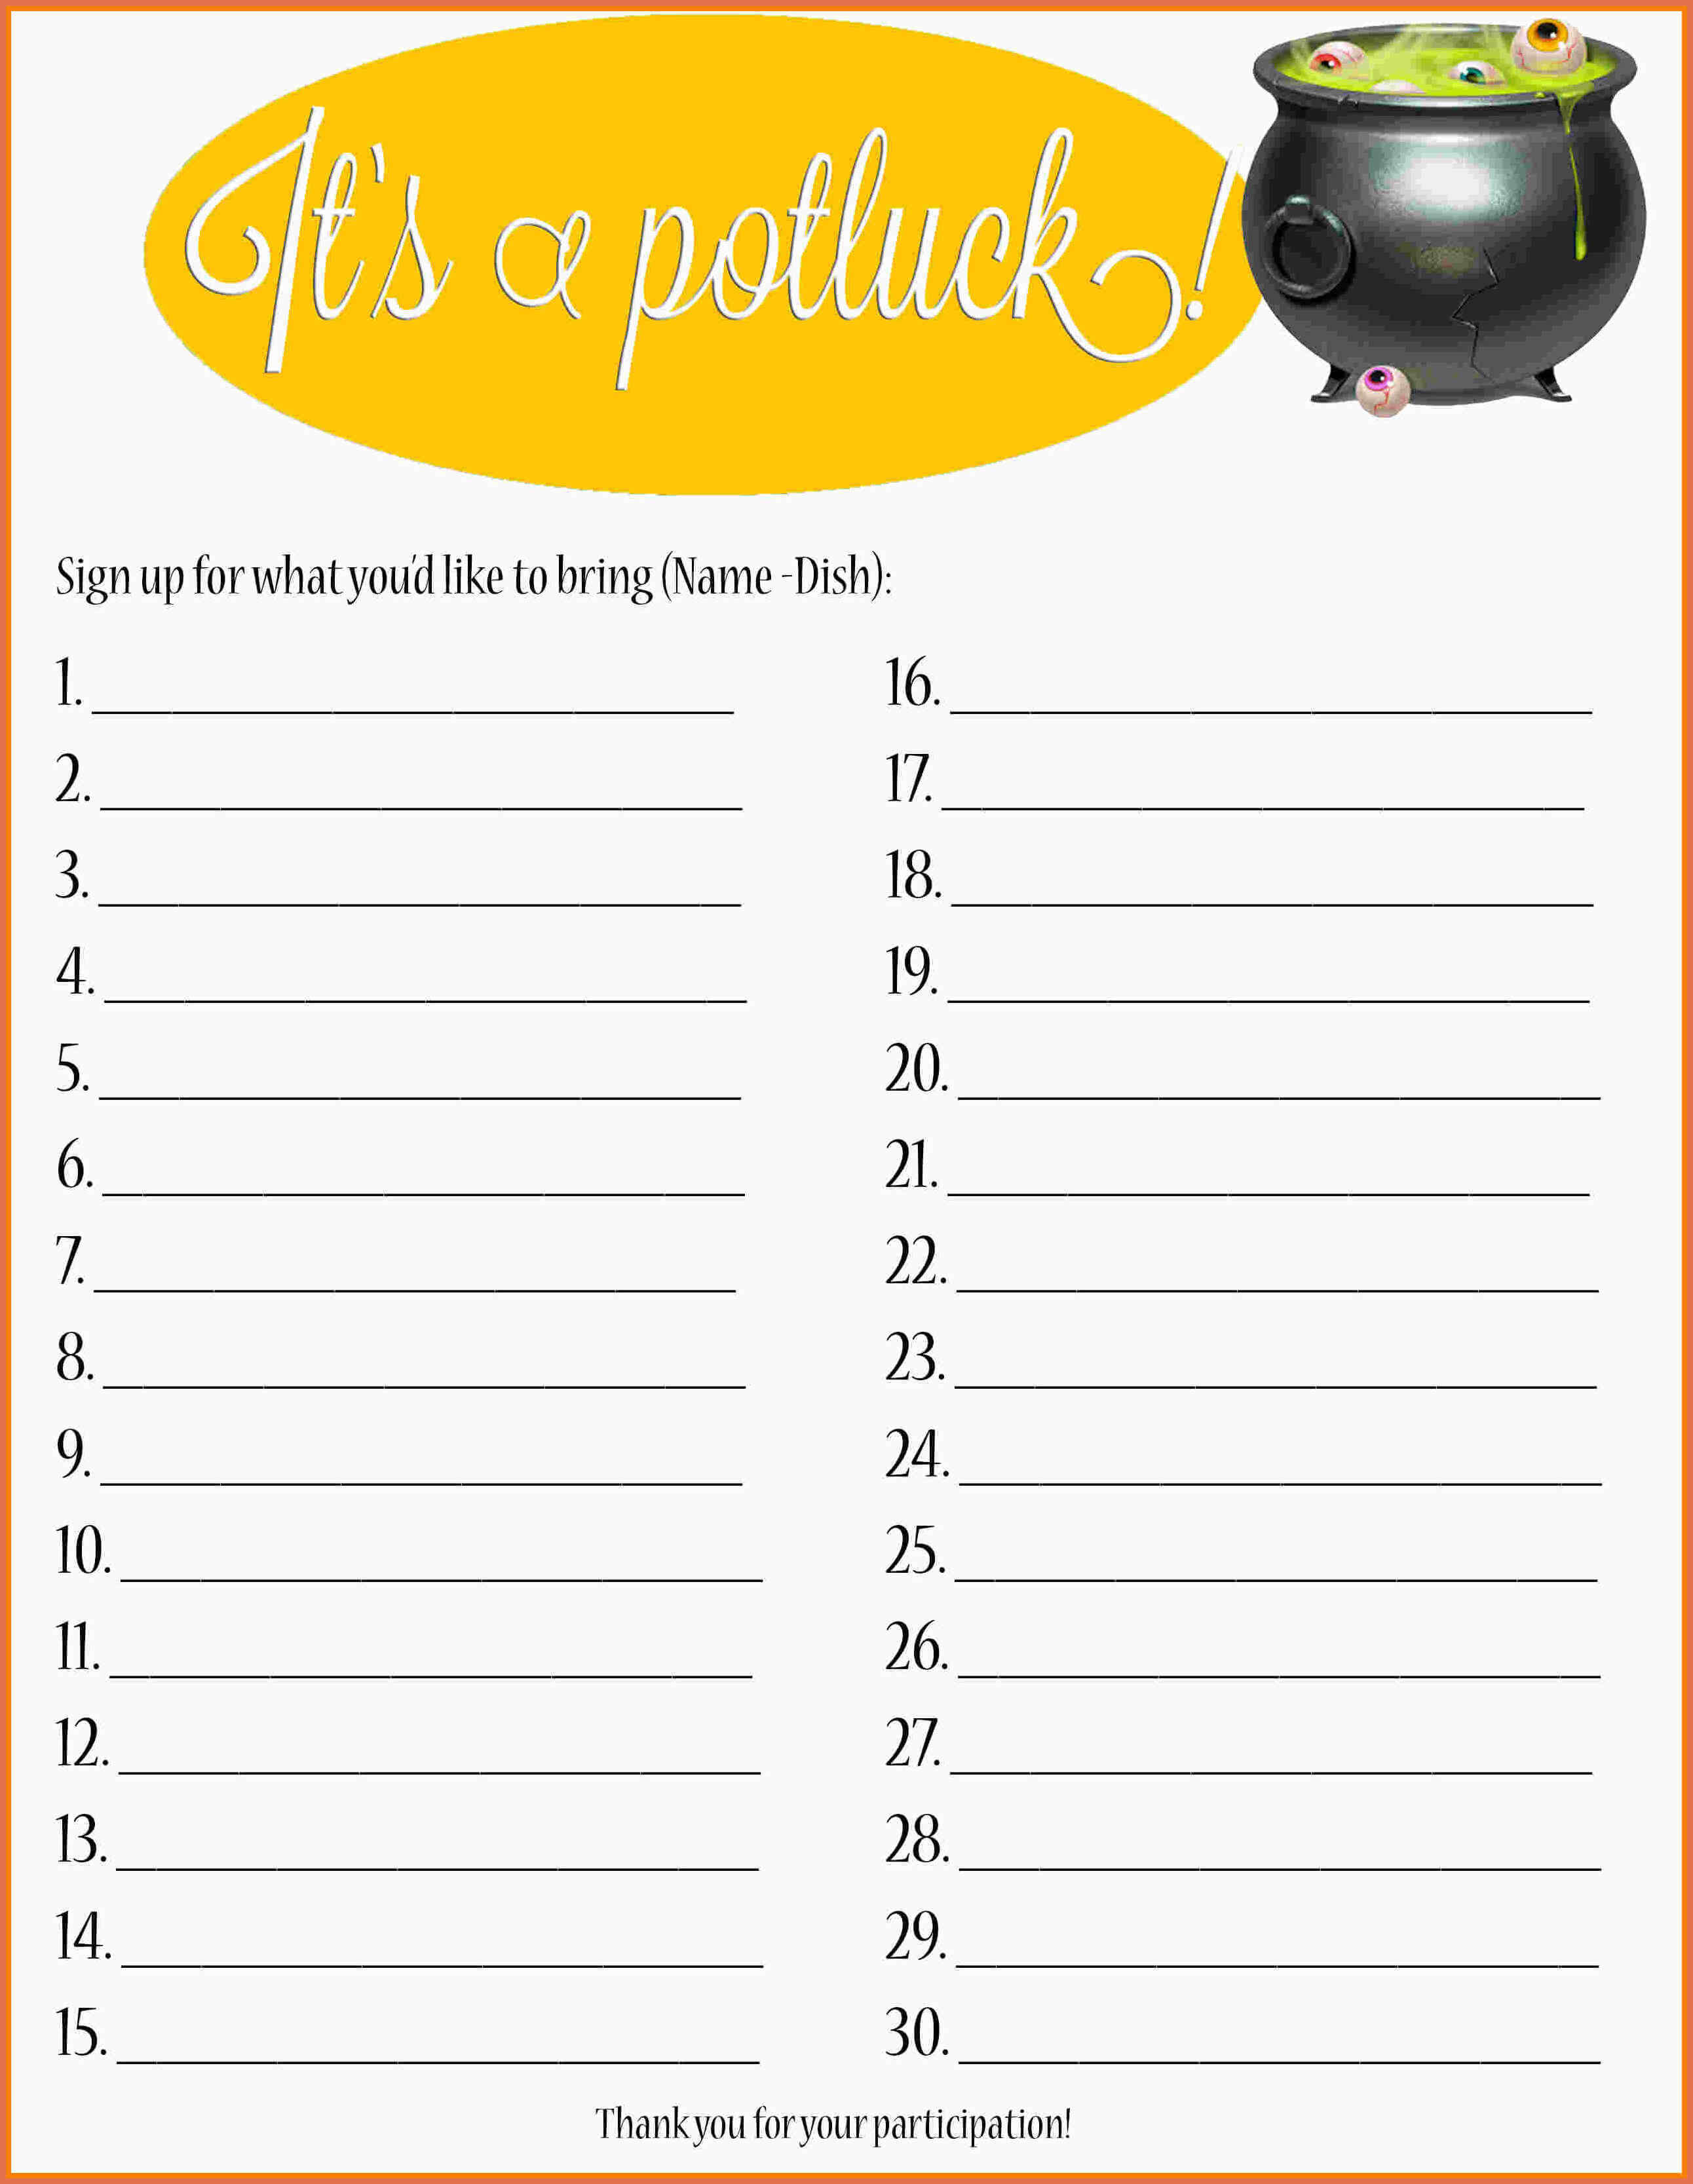 Potluck Sign Up Sheet Template Word | Charlotte Clergy Coalition In Potluck Signup Sheet Template Word